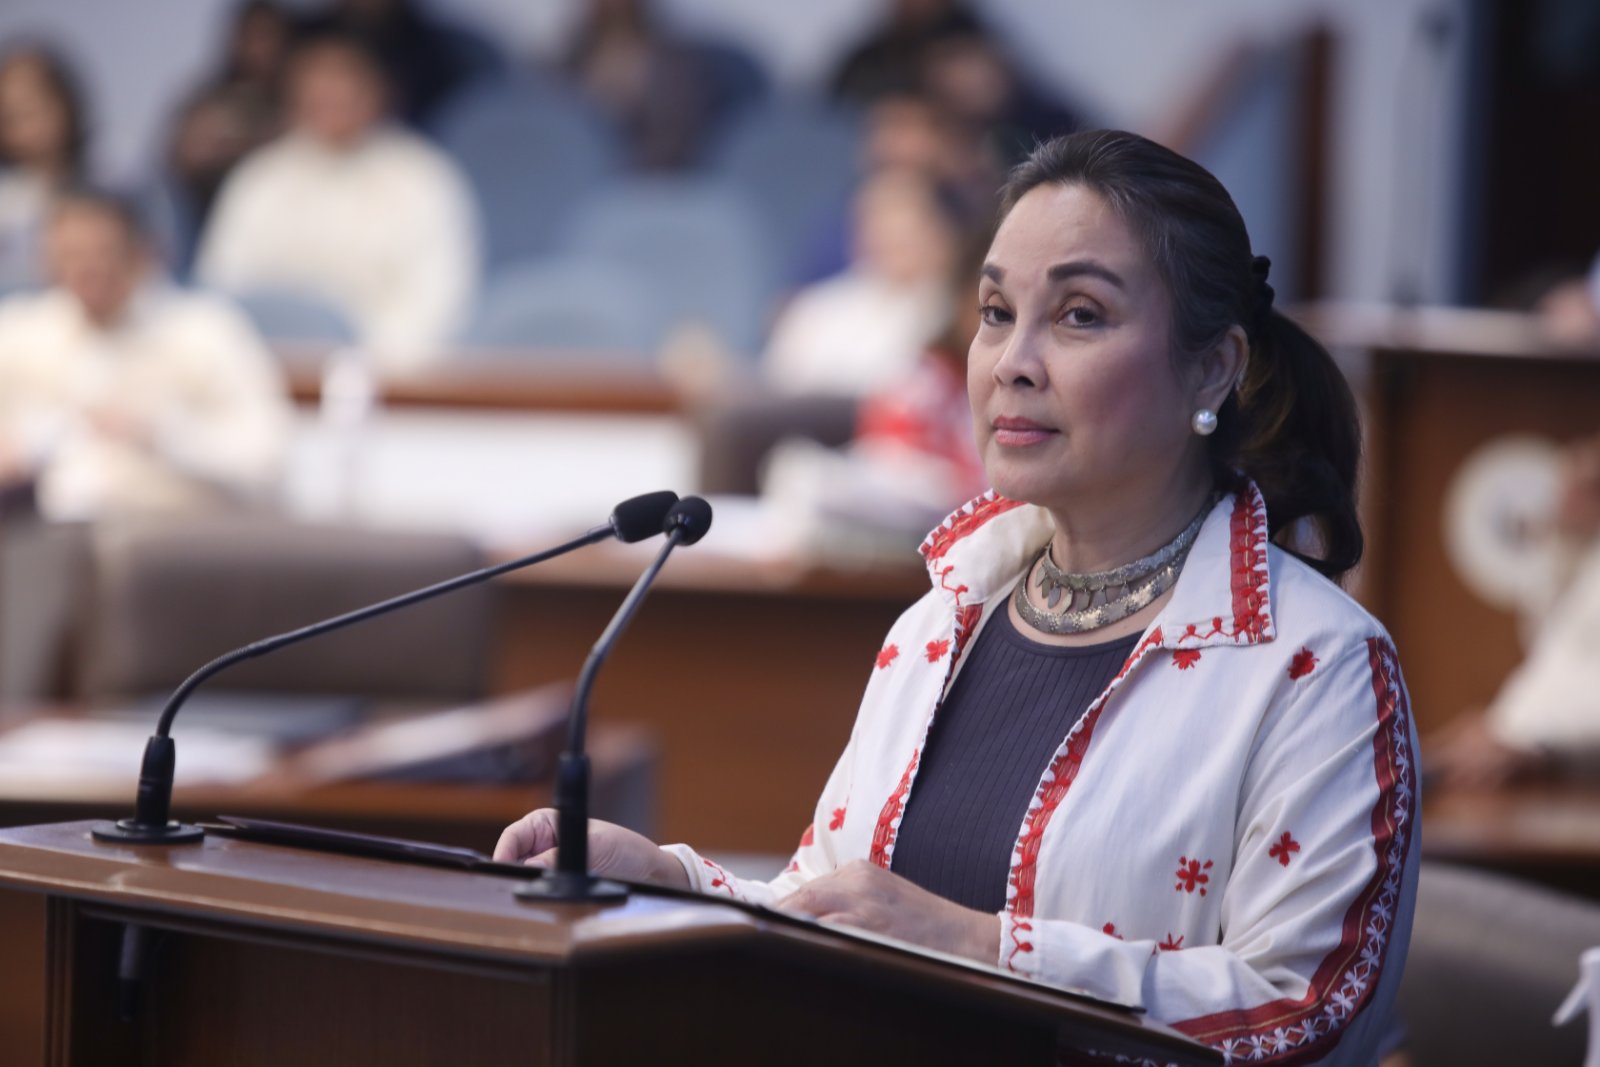 Senate President Pro Tempore Loren Legarda on Wednesday issued a singular appeal to the Bureau of Corrections (BuCor): Refrain from constructing establishments in Masungi Georeserve in Tanay, Rizal.